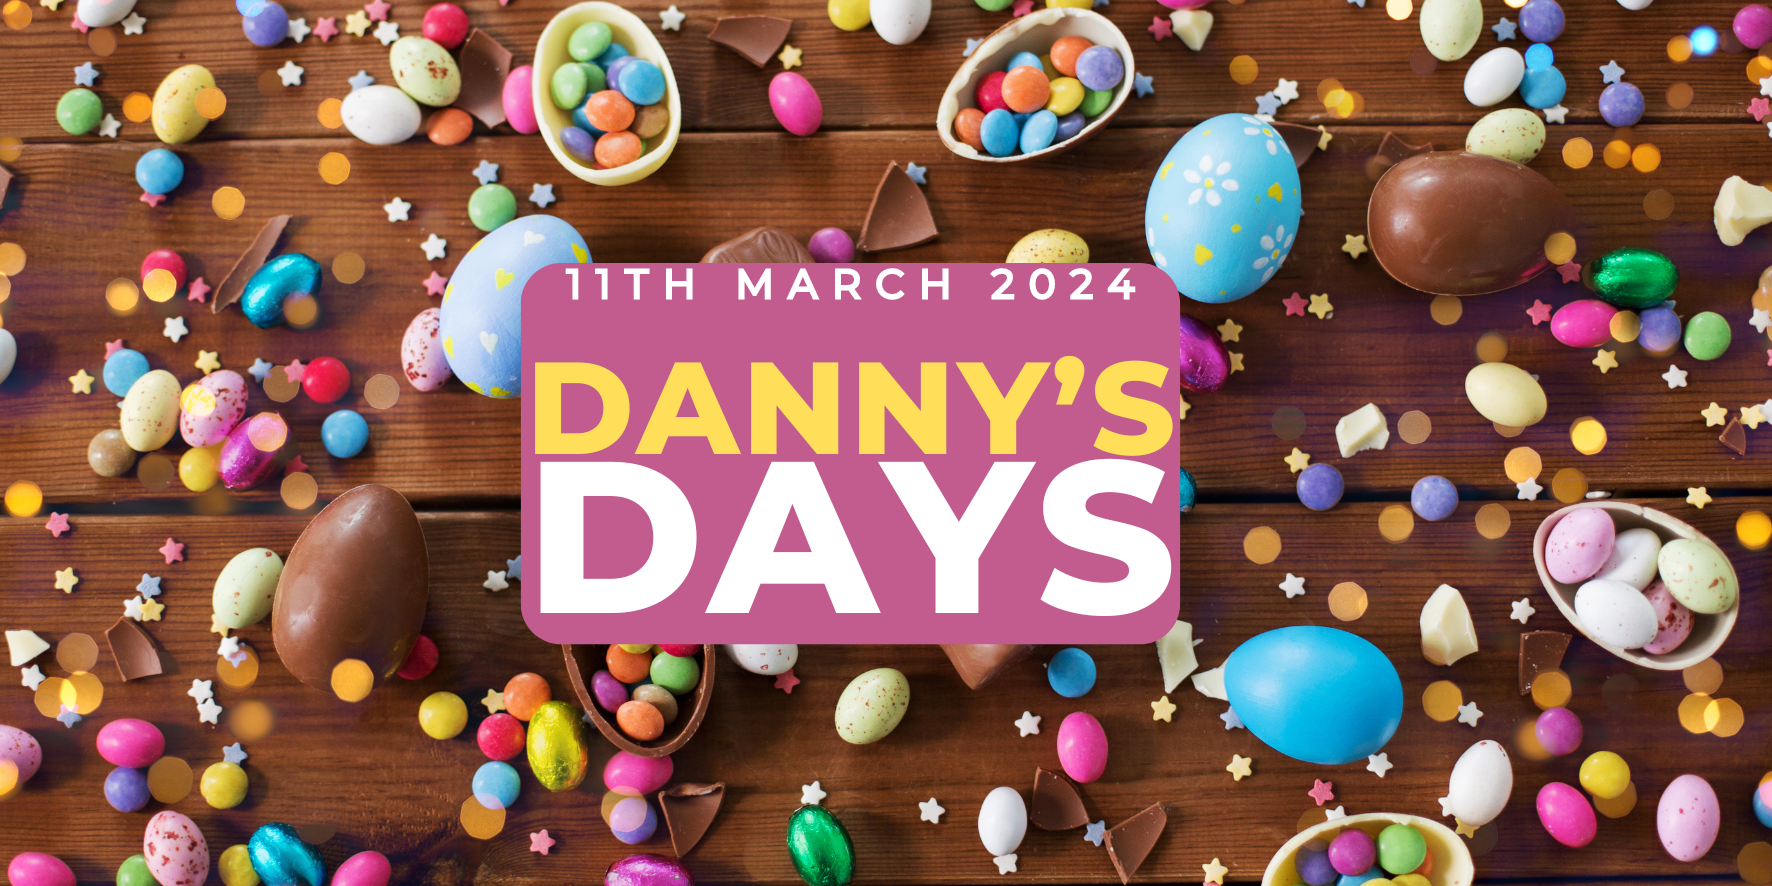 Danny's Days - 11th March 2024